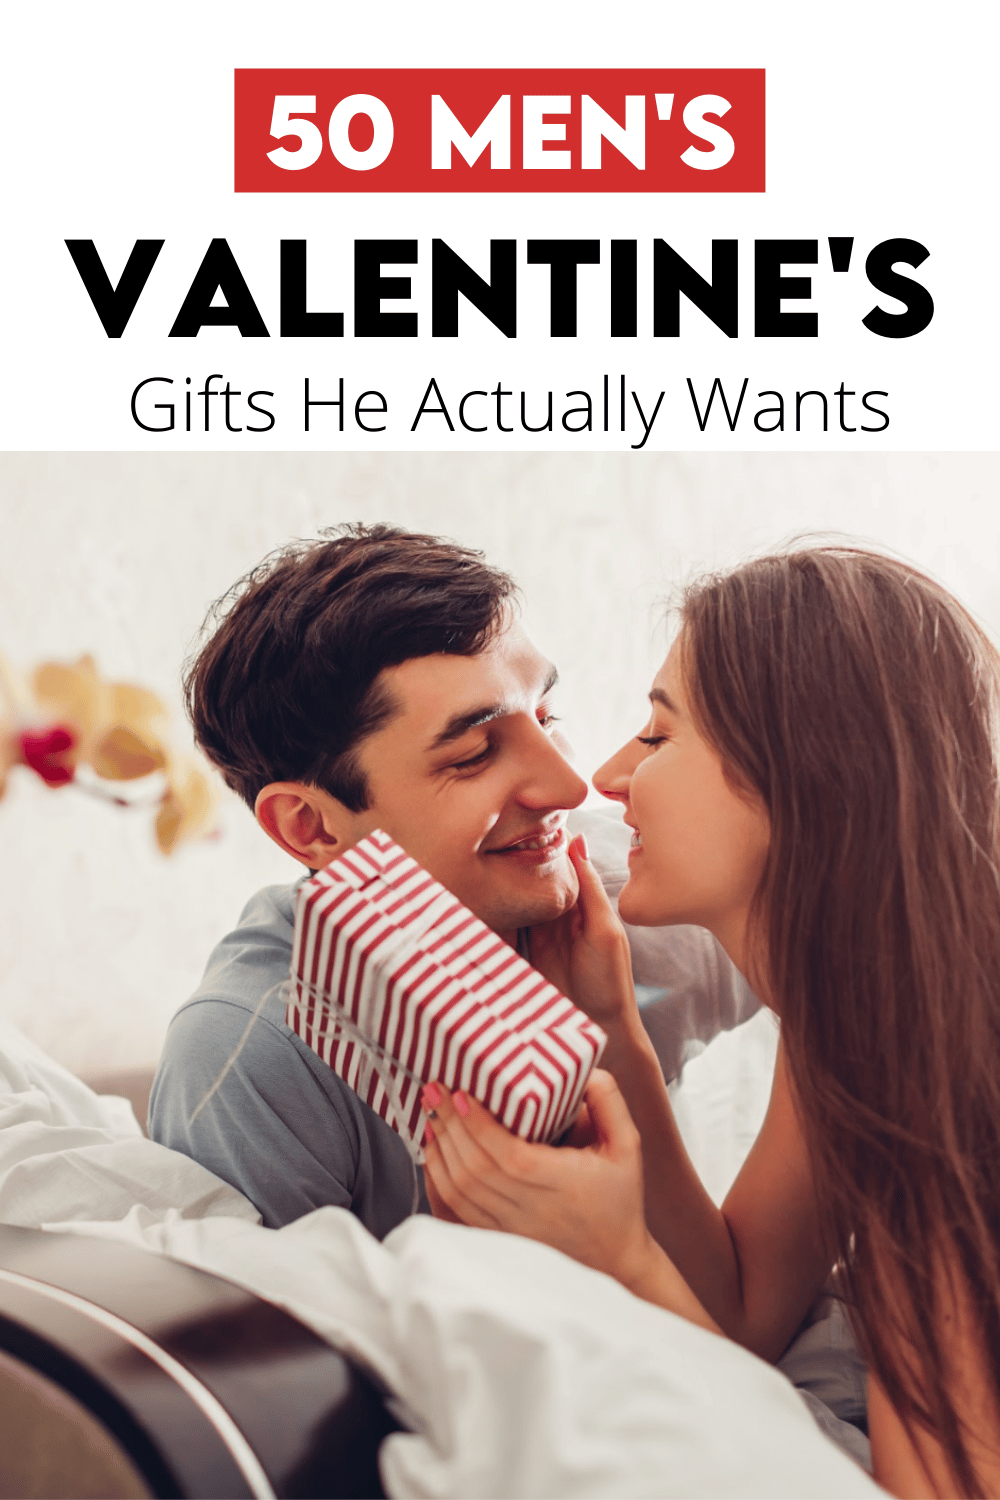 Good men's Valentine's gifts are so hard to find! Saving this list--so many good Ideas! #mensvalentinesgifts #valentinesdaygiftsformen | The Dating Divas